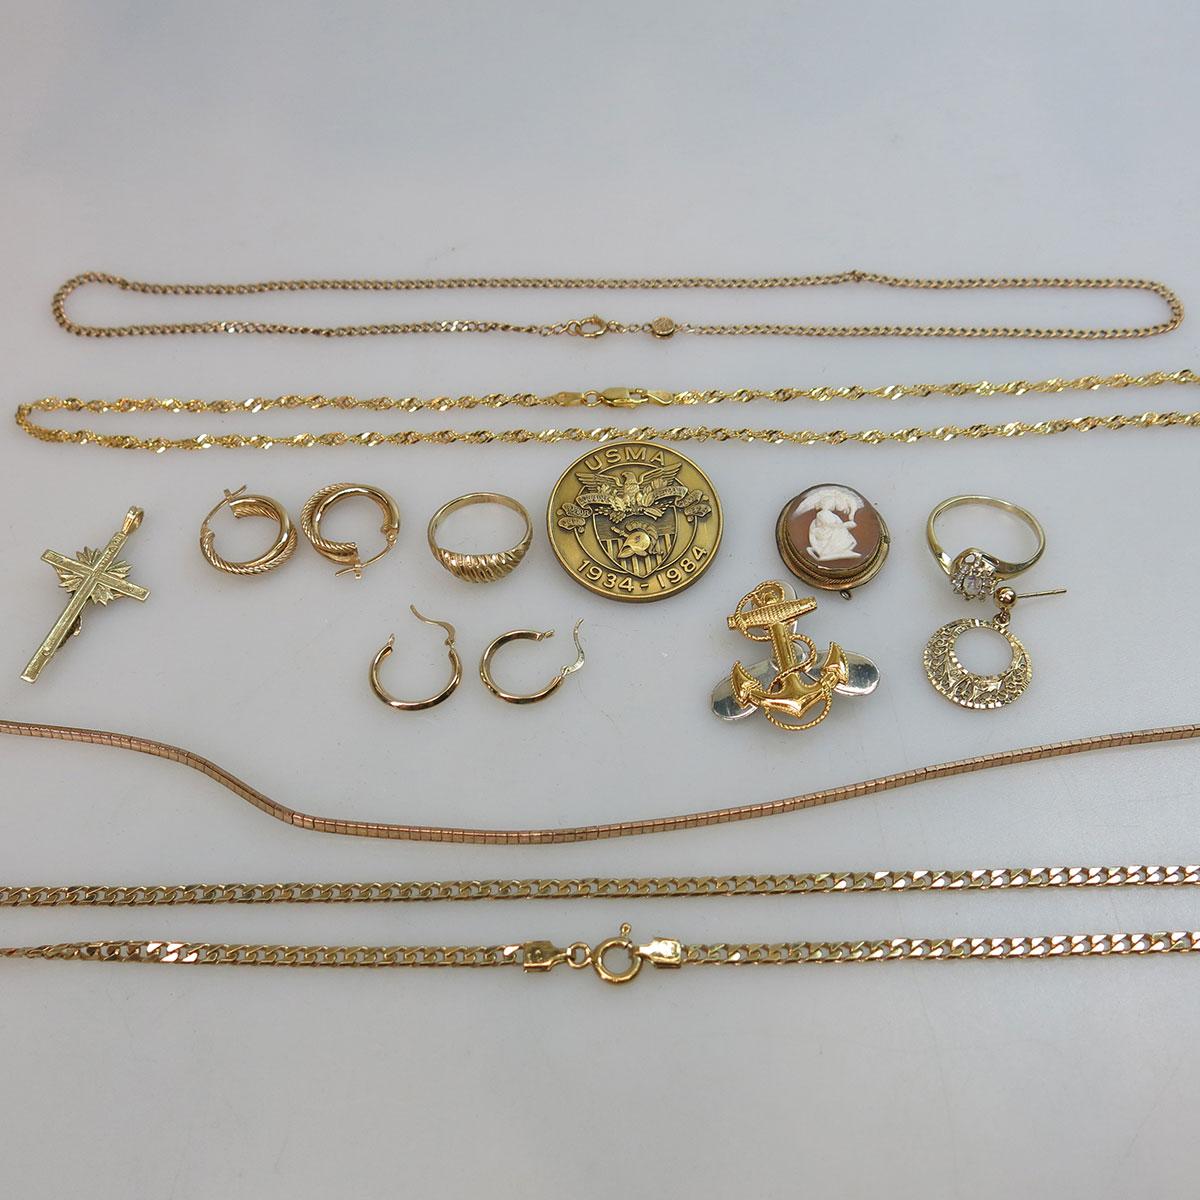 Small Quantity Of !4k Yellow Gold Jewellery